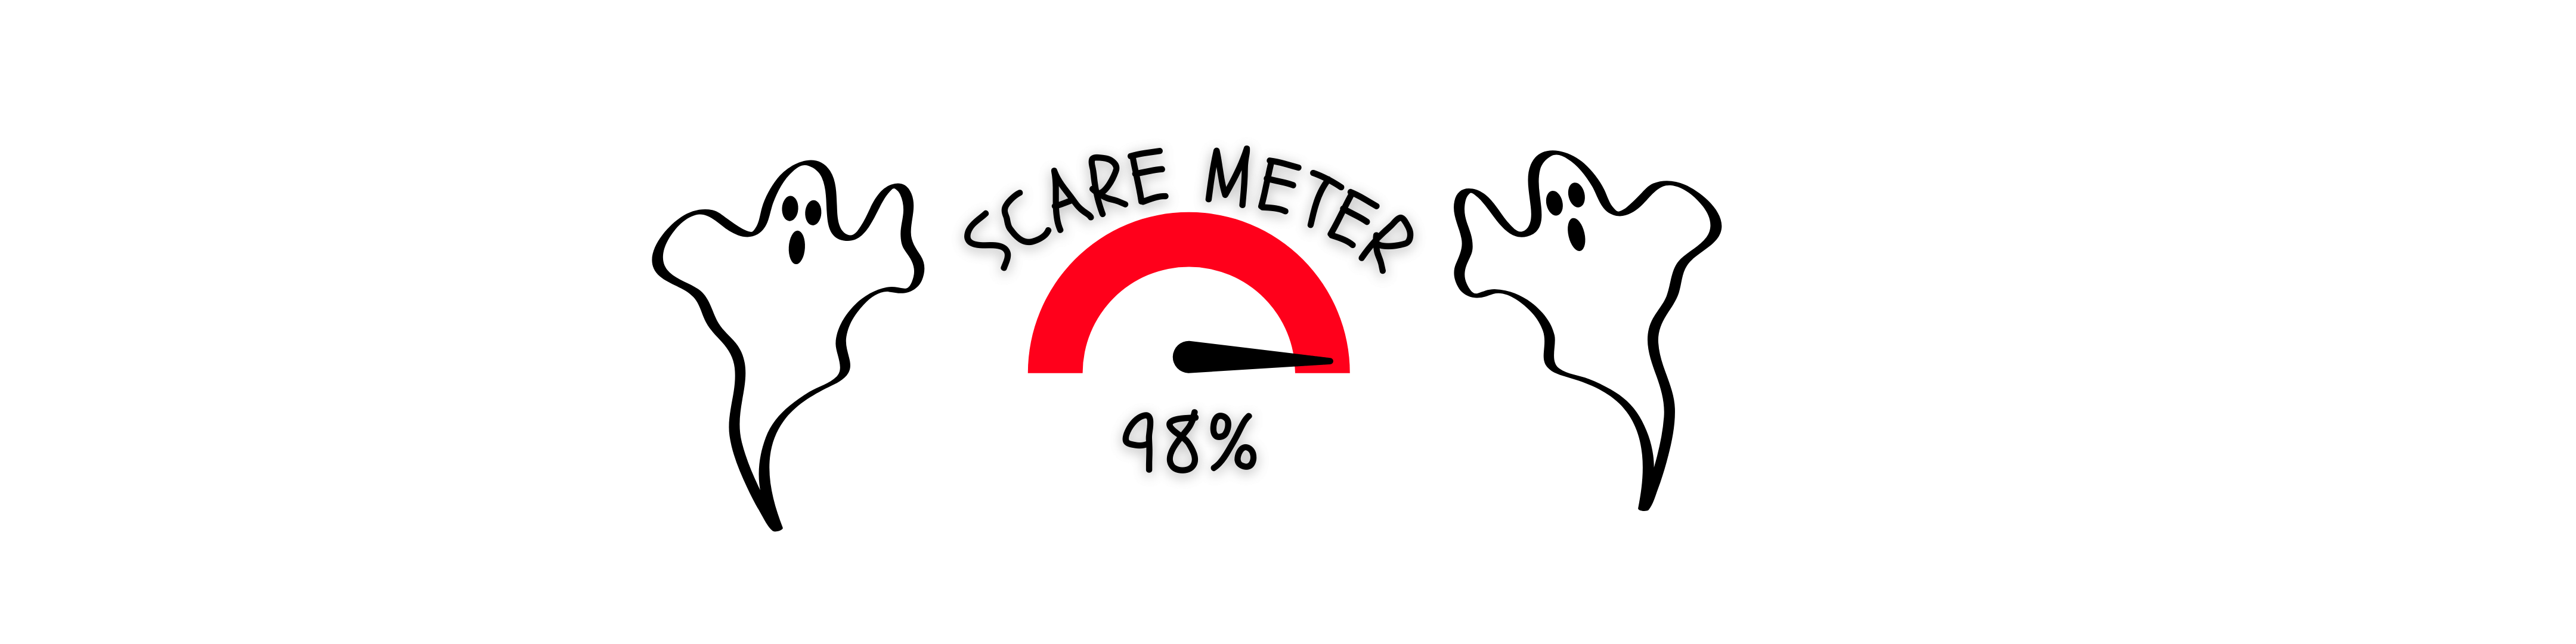 scare-meter 98